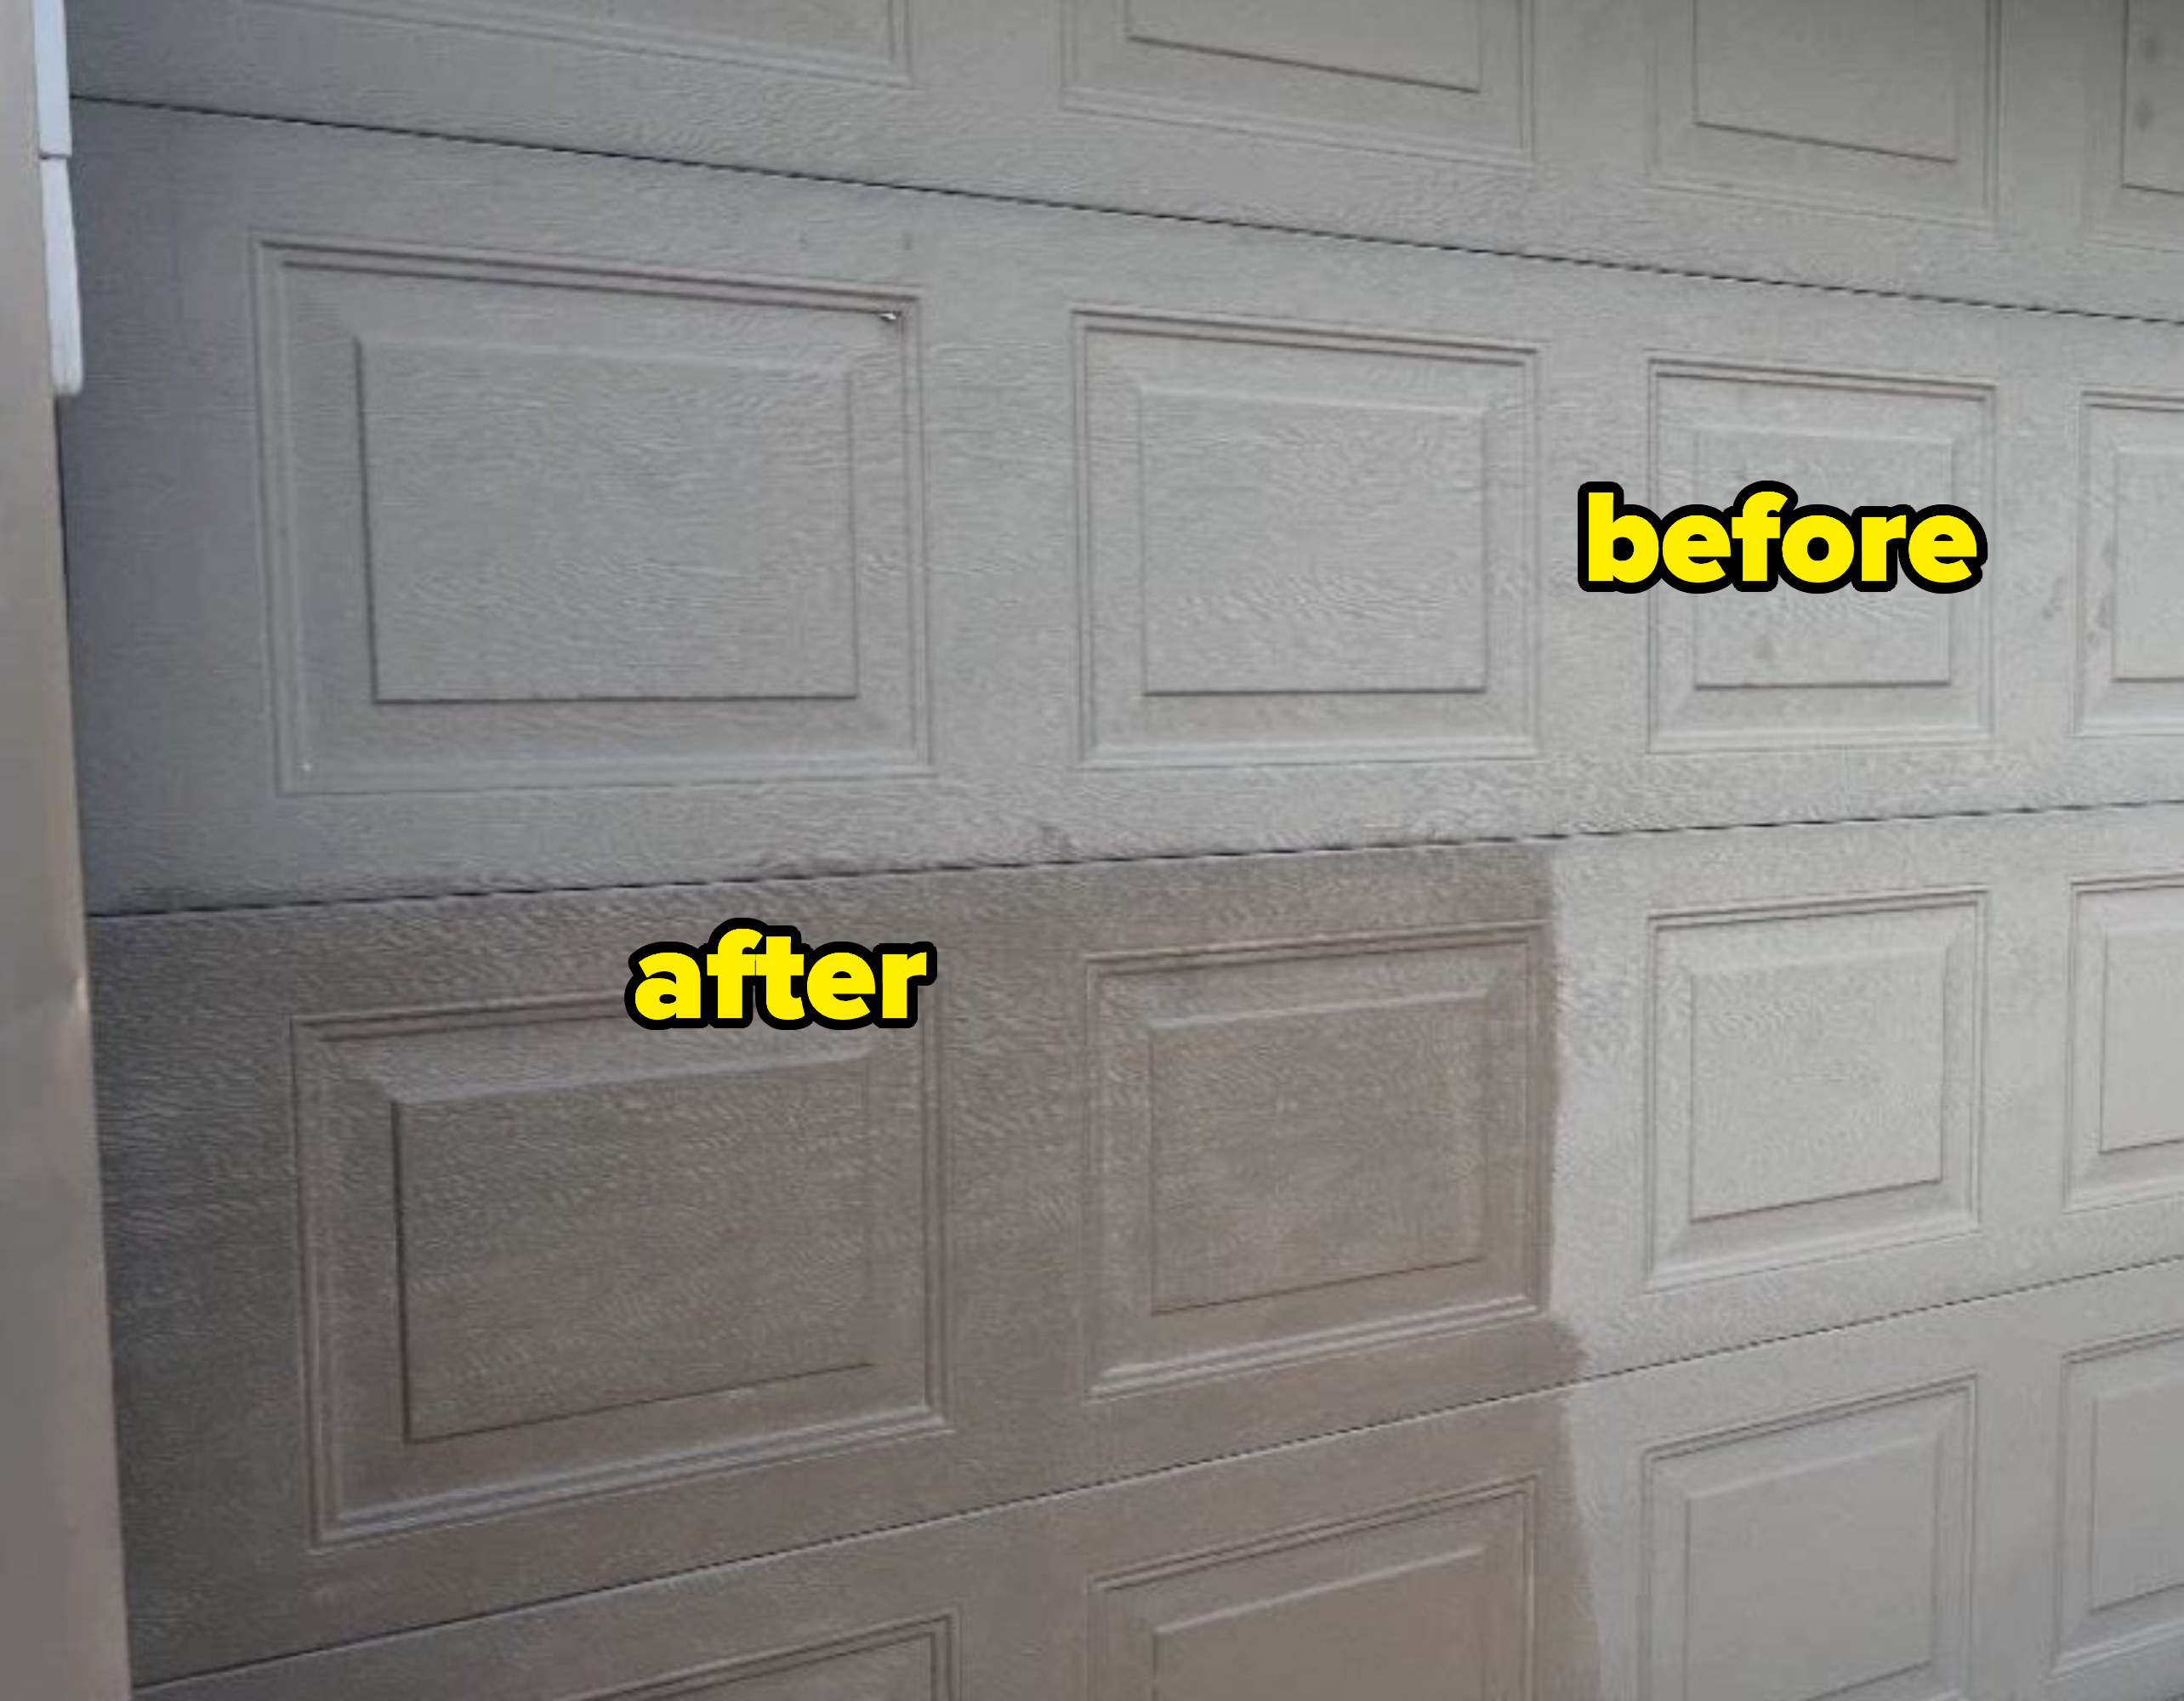 reviewer photo showing their garage door before and after using the wipes